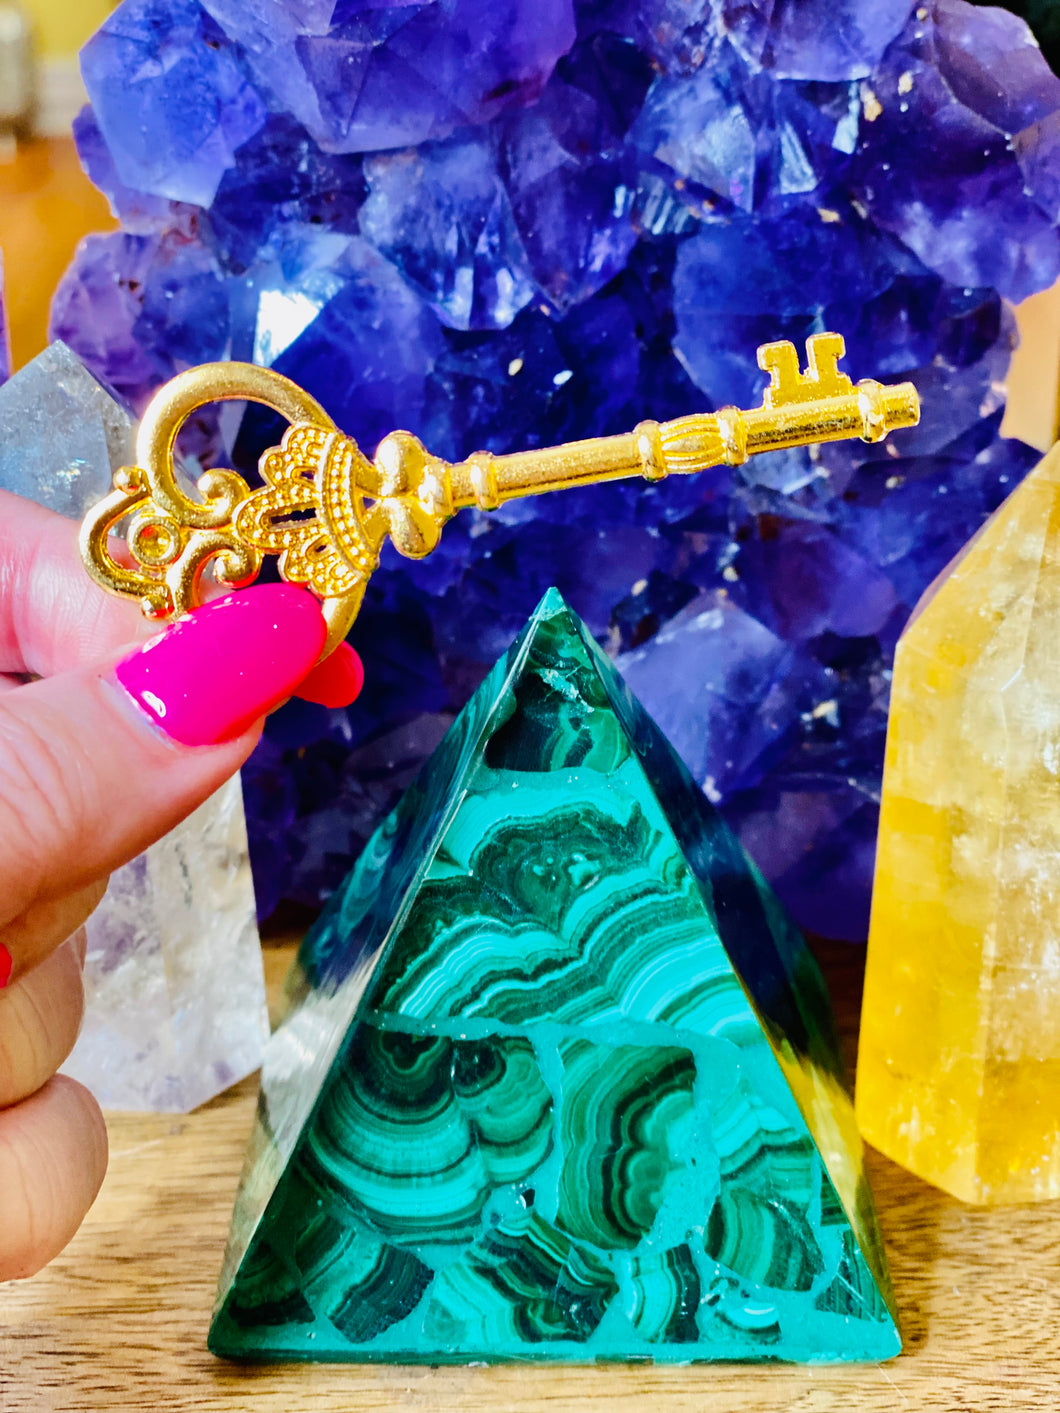 Gold Key To Open Doors & Remove Obstacles